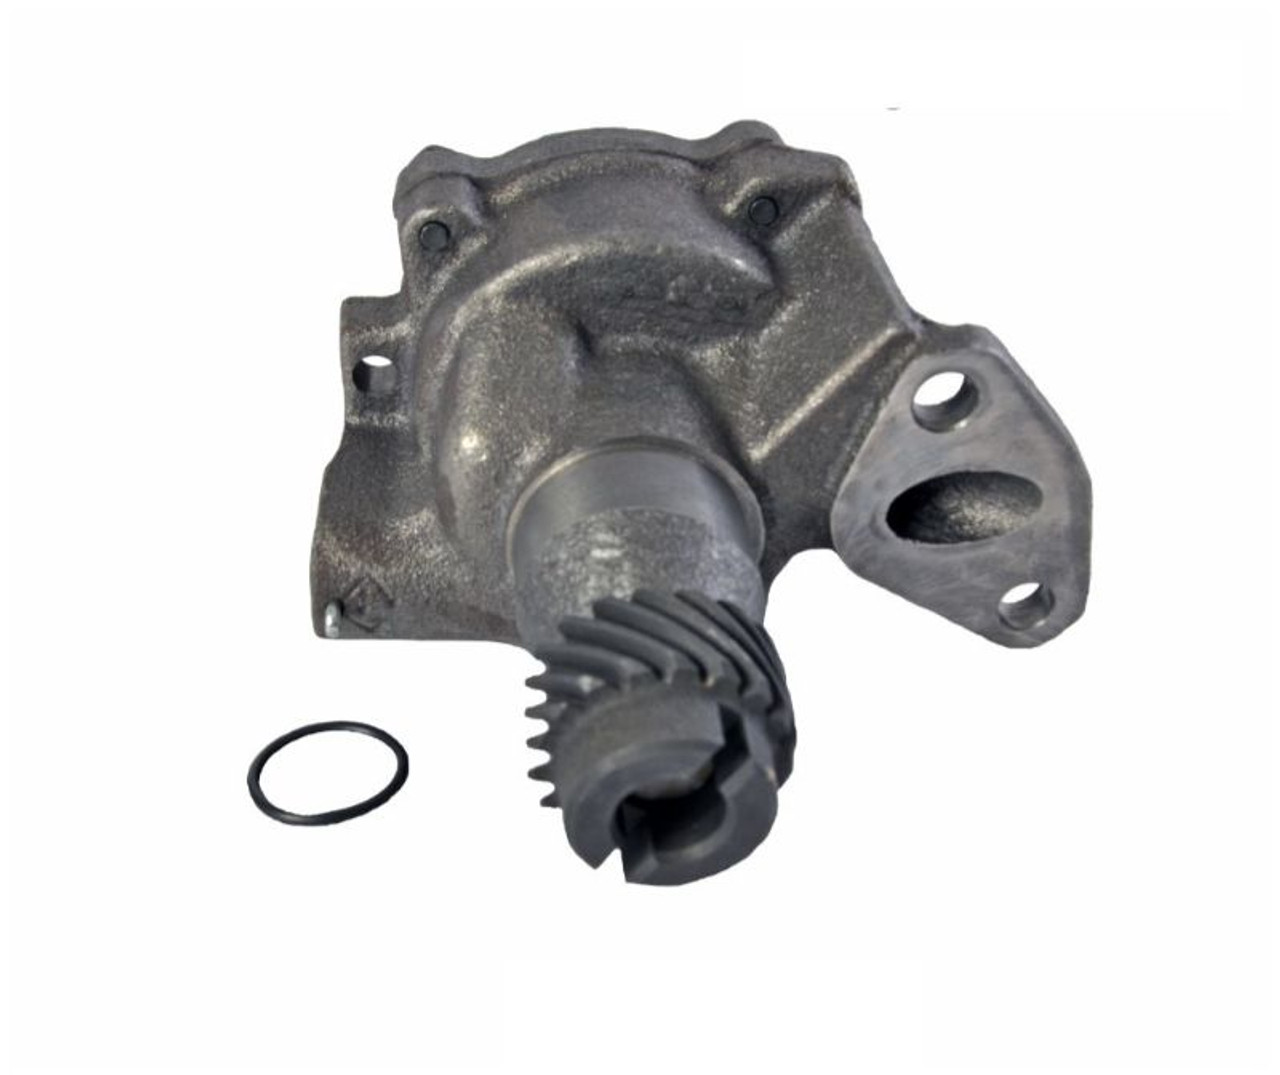 1991 Plymouth Acclaim 2.5L Engine Oil Pump EP118 -278